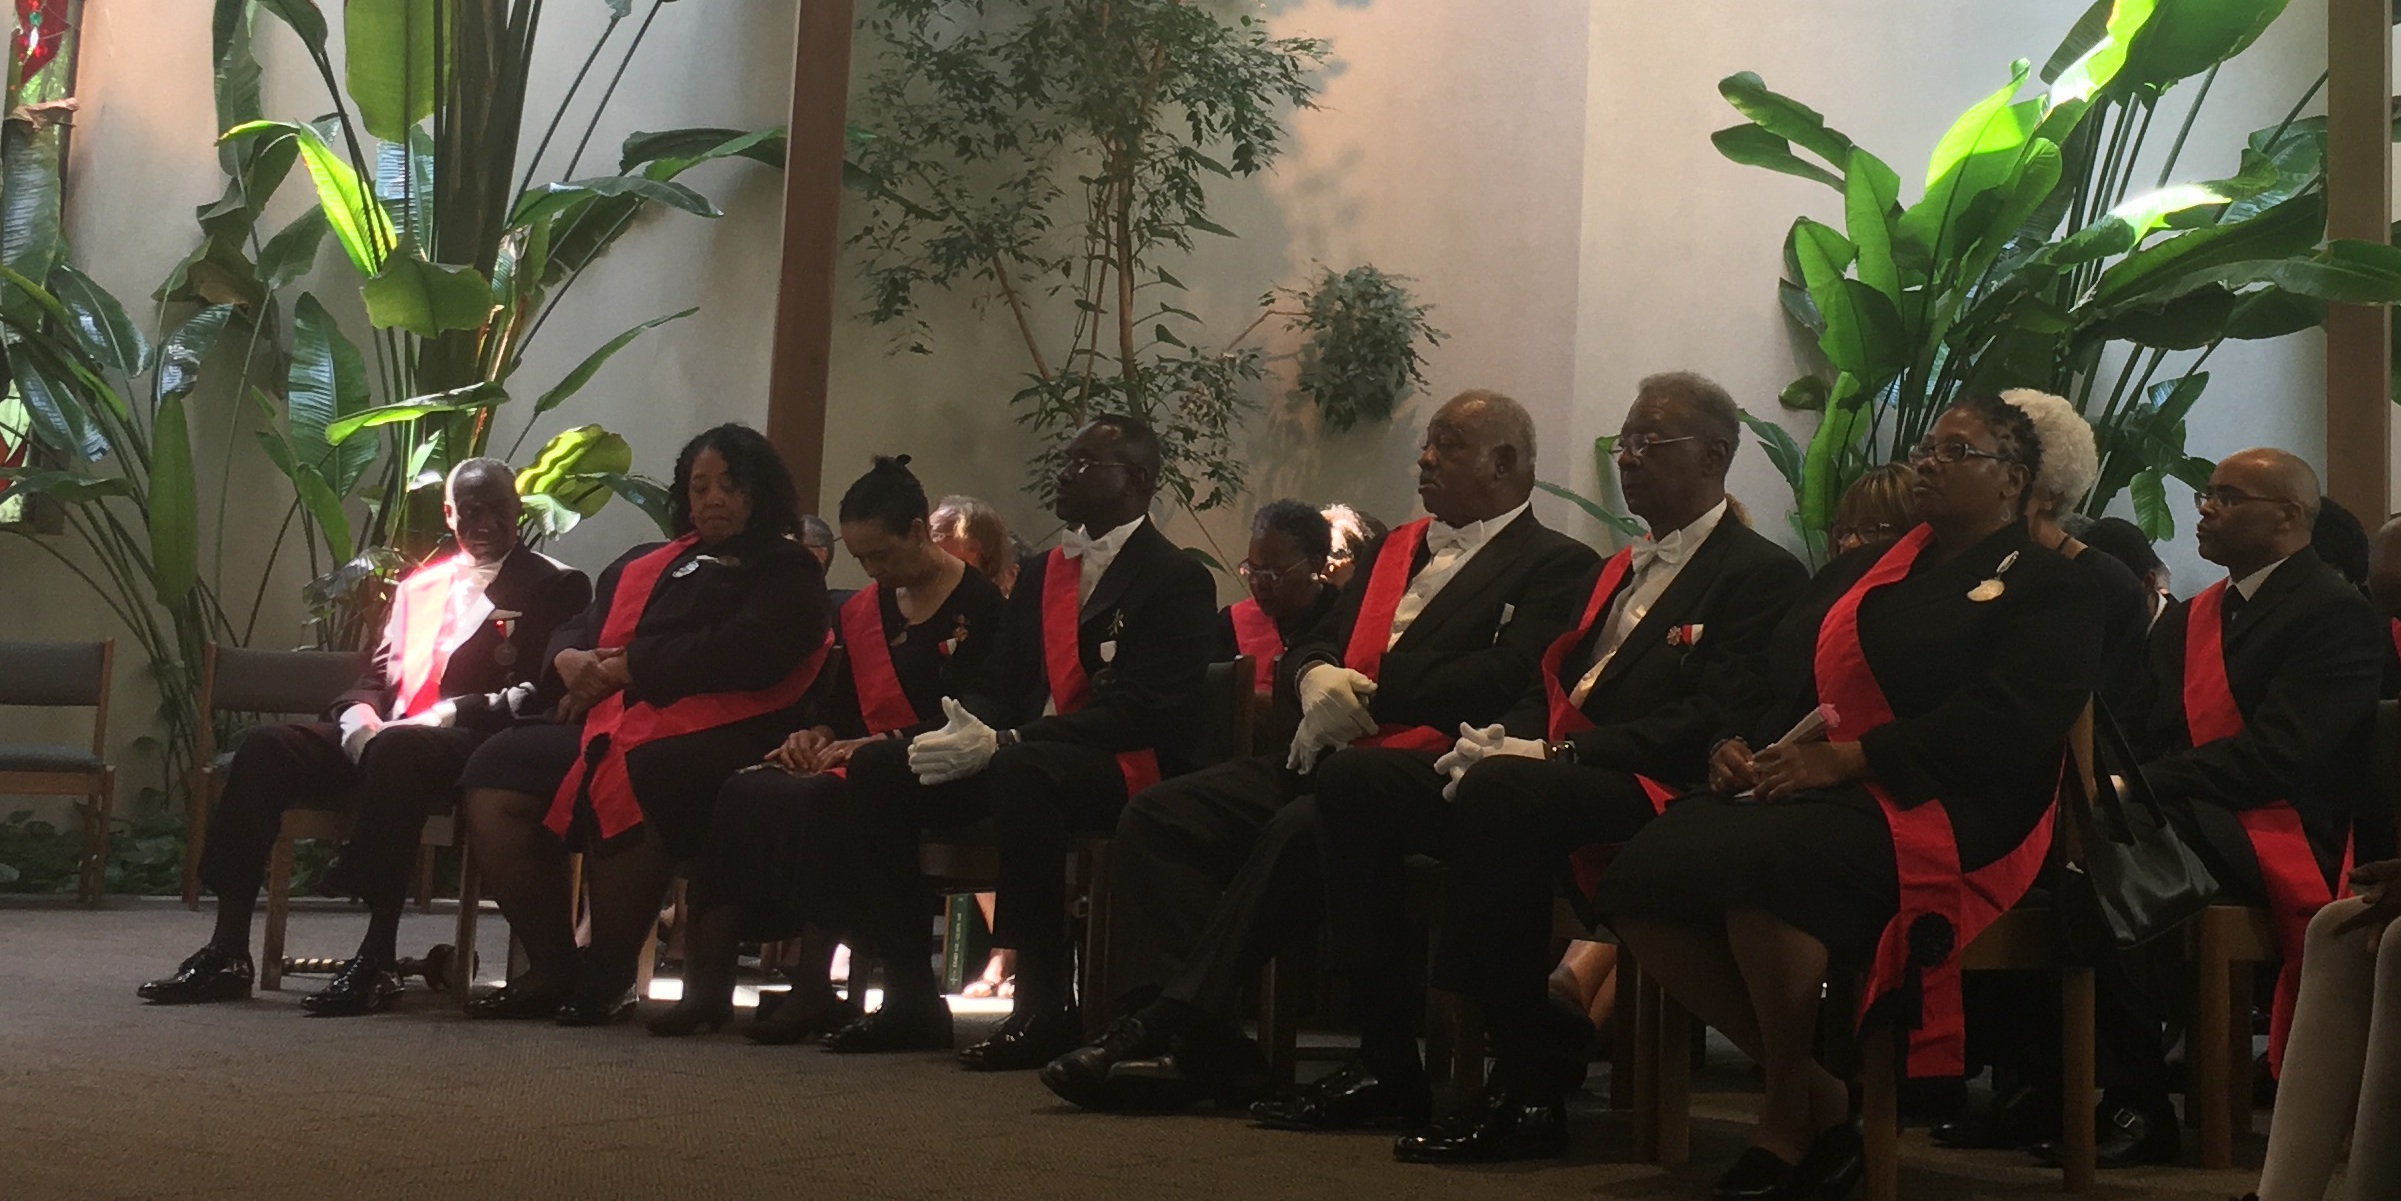 row of seated members of Catholic dressed in black with red sash during Mass